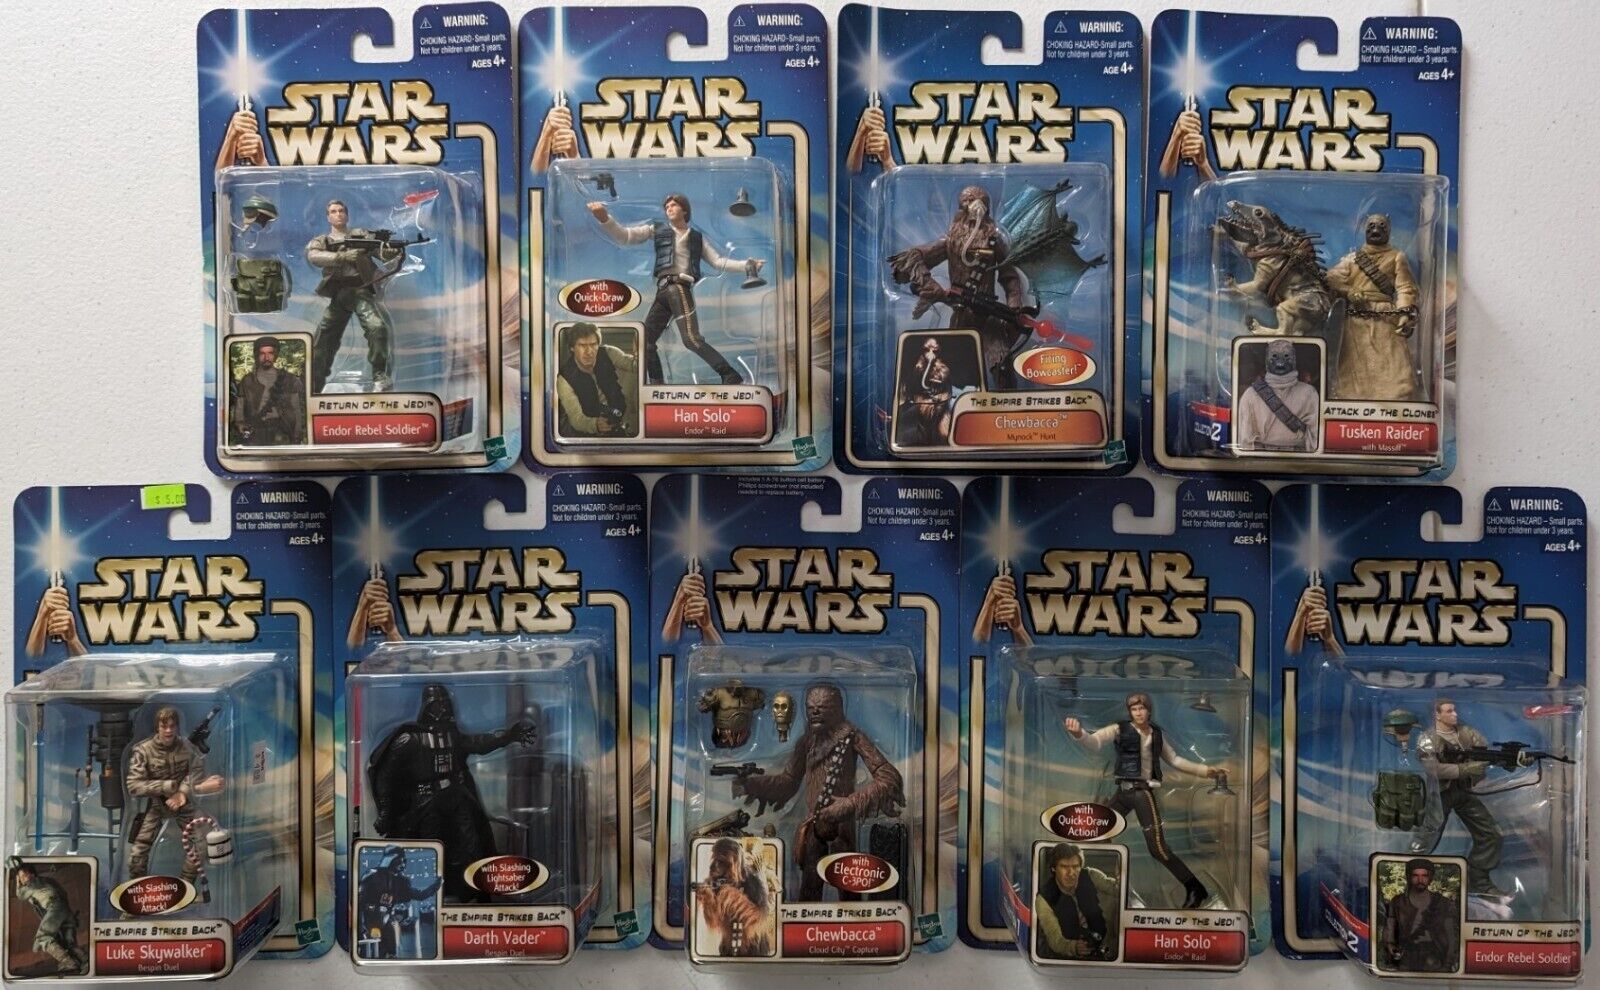 Star Wars Saga 2002/2003 Lot of 9 action figures Trilogy Lot - New in Box 3.75"